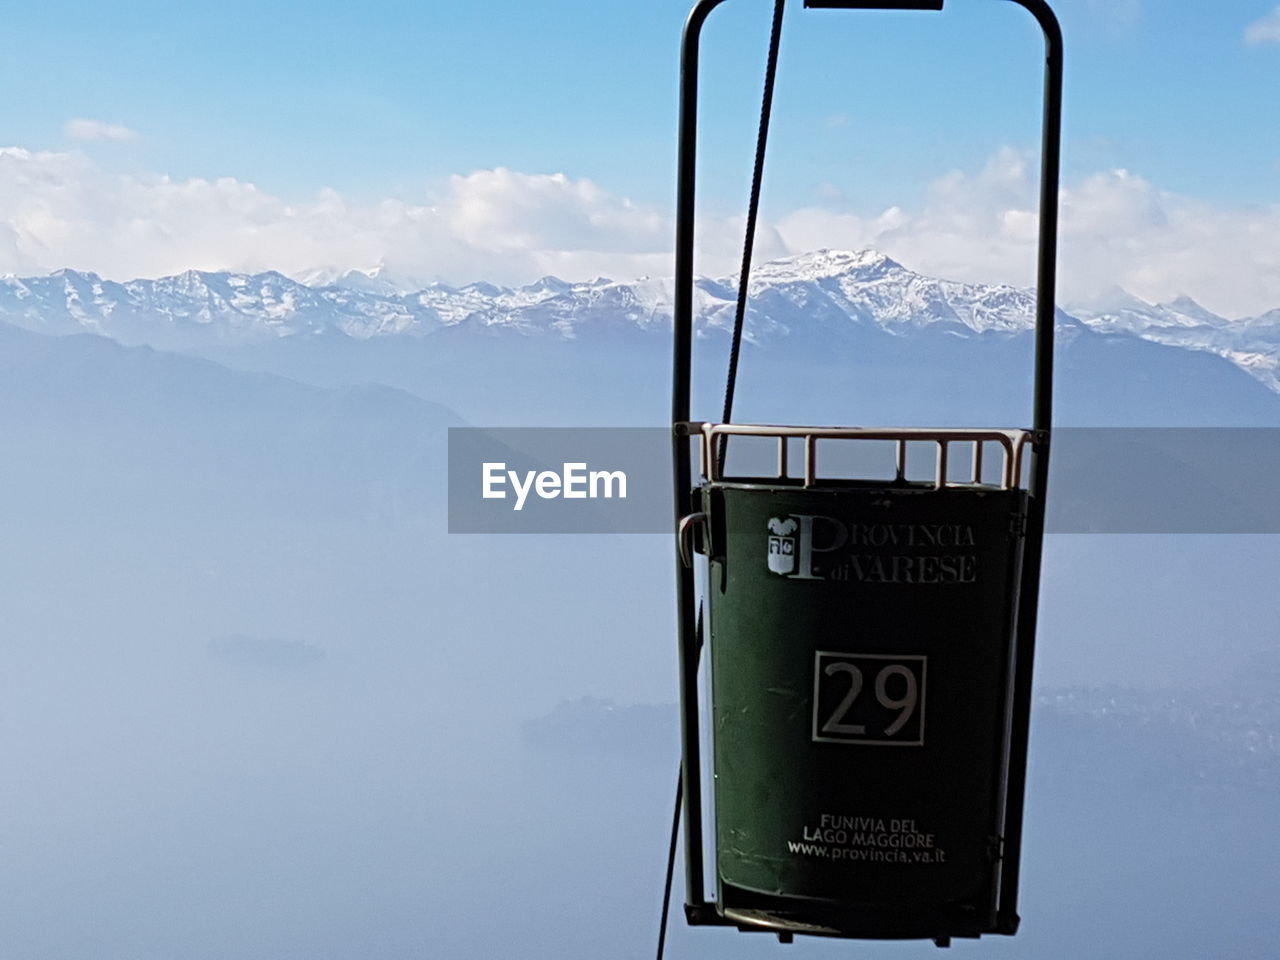 VIEW OF OVERHEAD CABLE CAR AGAINST SKY